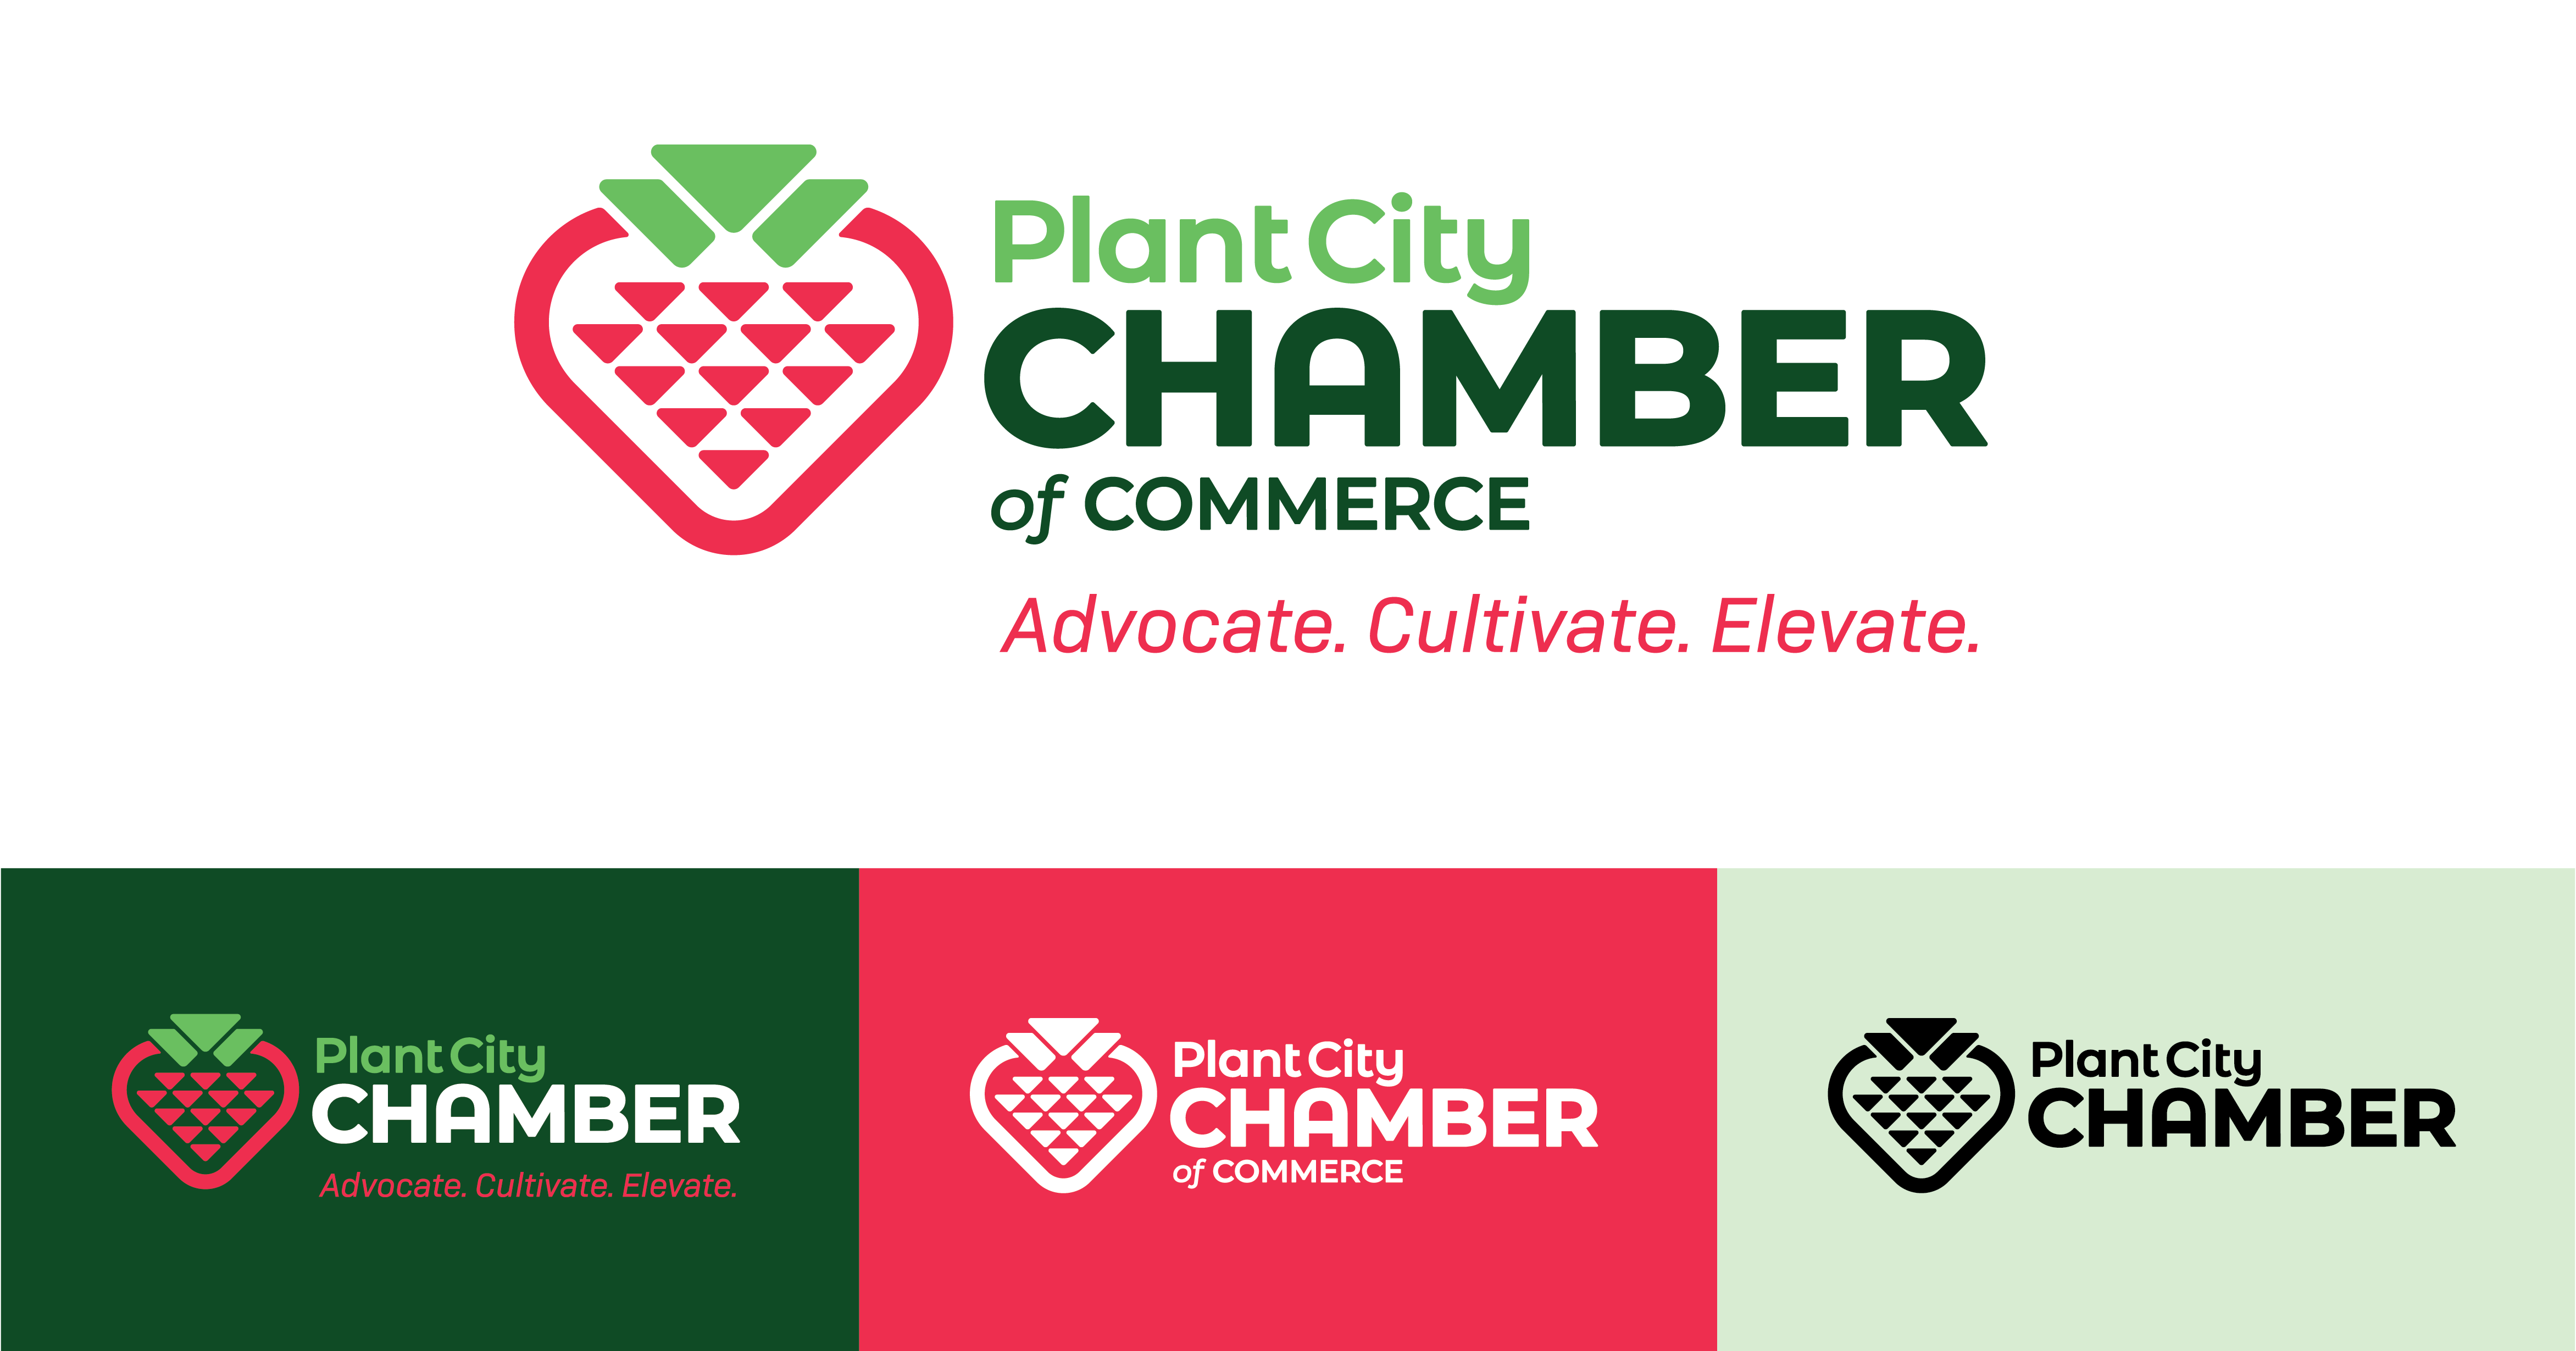 Plant City Chamber of Commerce logo with strawberry icon and other versions on different background colors